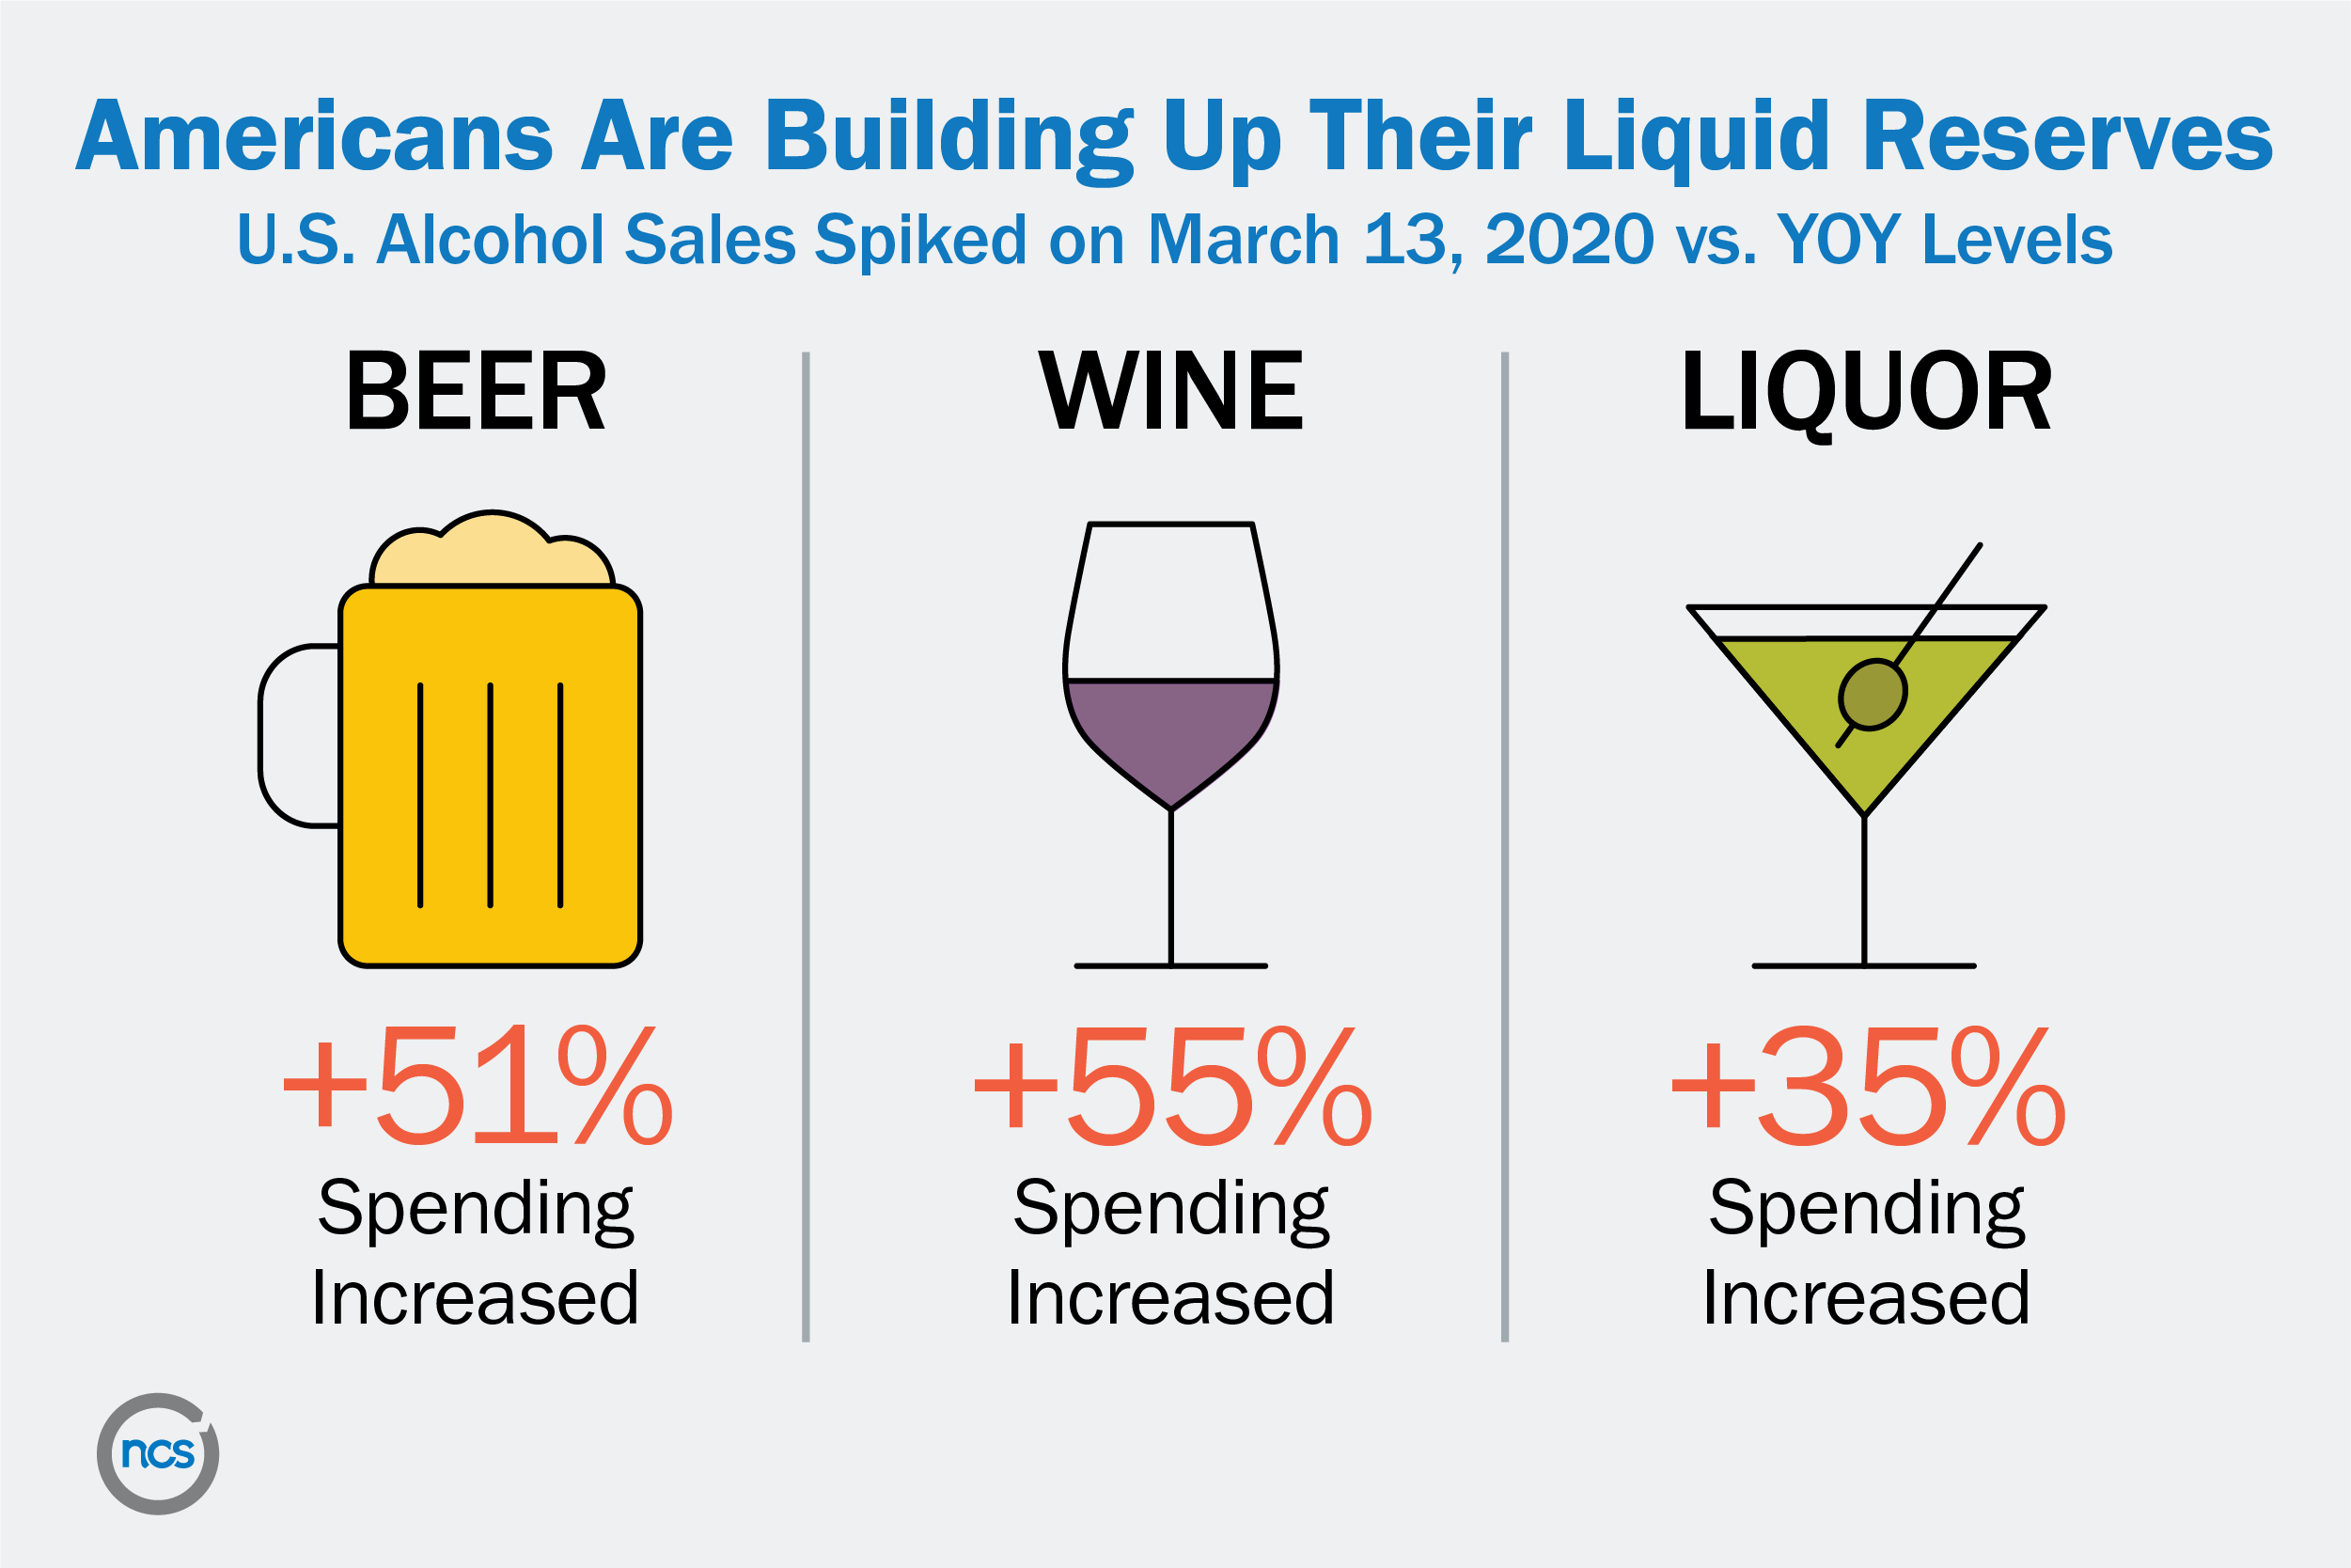 Infographic showing that beer, wine, and liquor sales increased on March 13, 2020